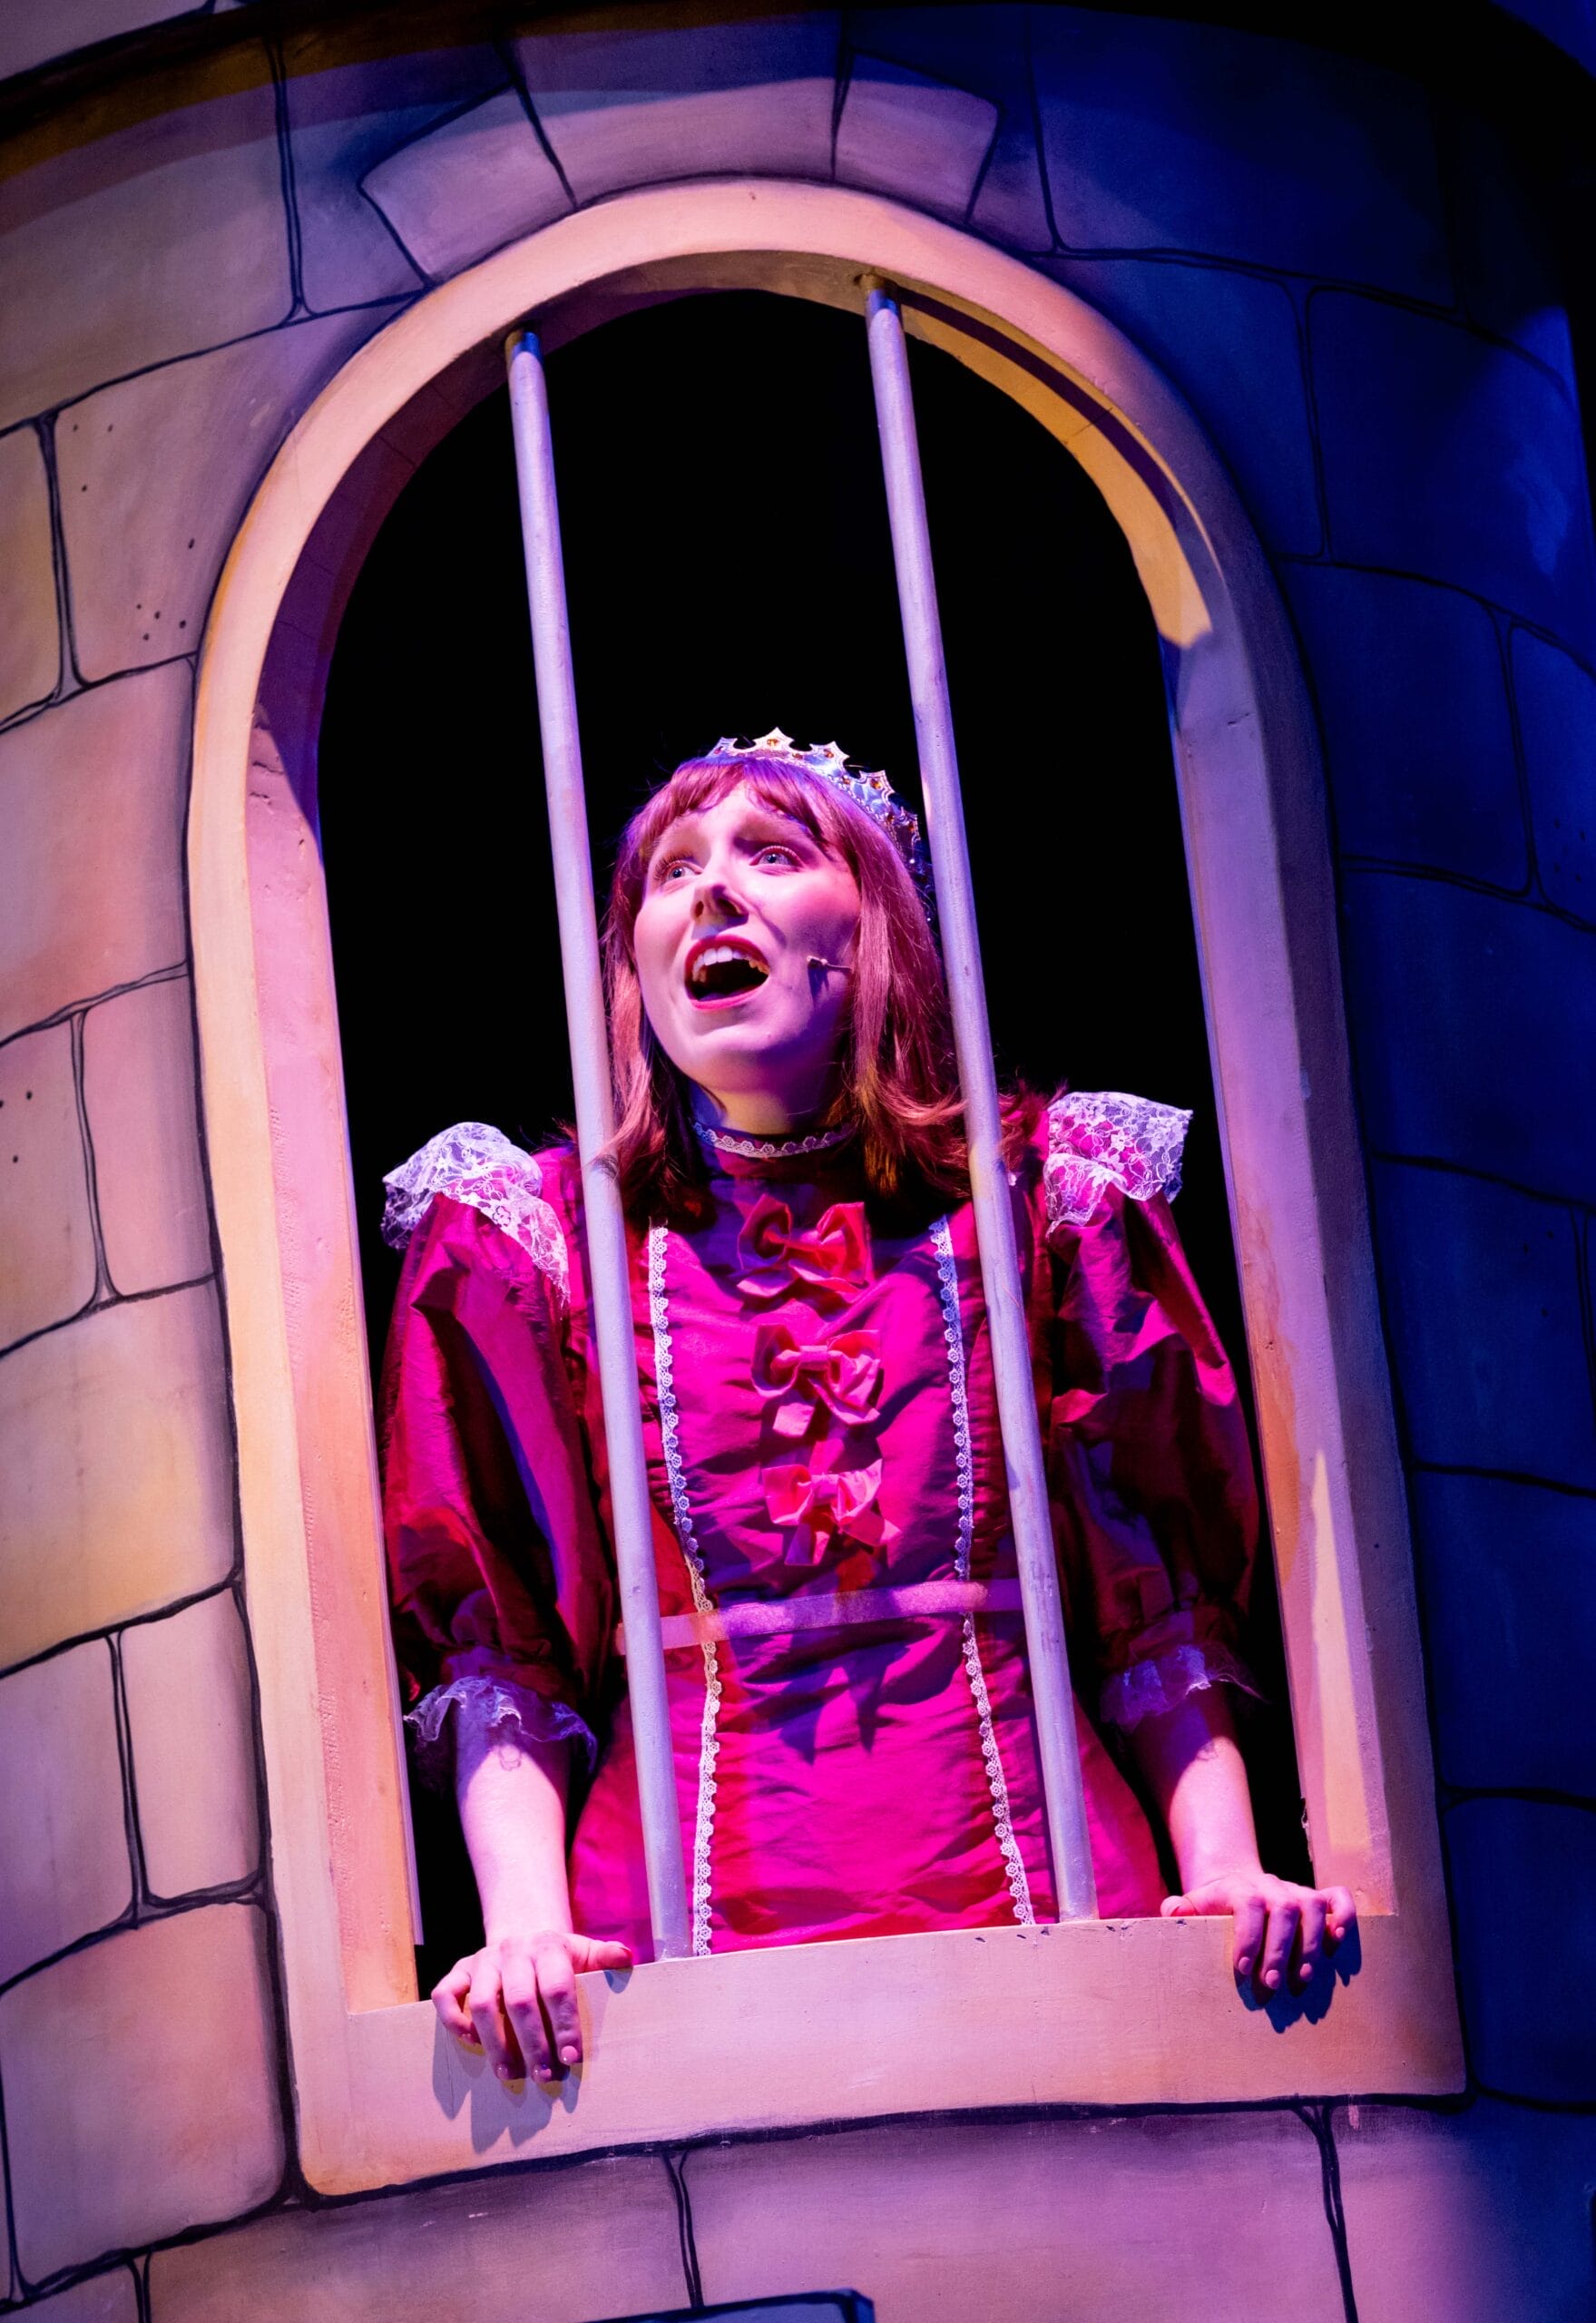 A princess in a castle tower leans on the edge of a barred window. She is looking upwards and singing.